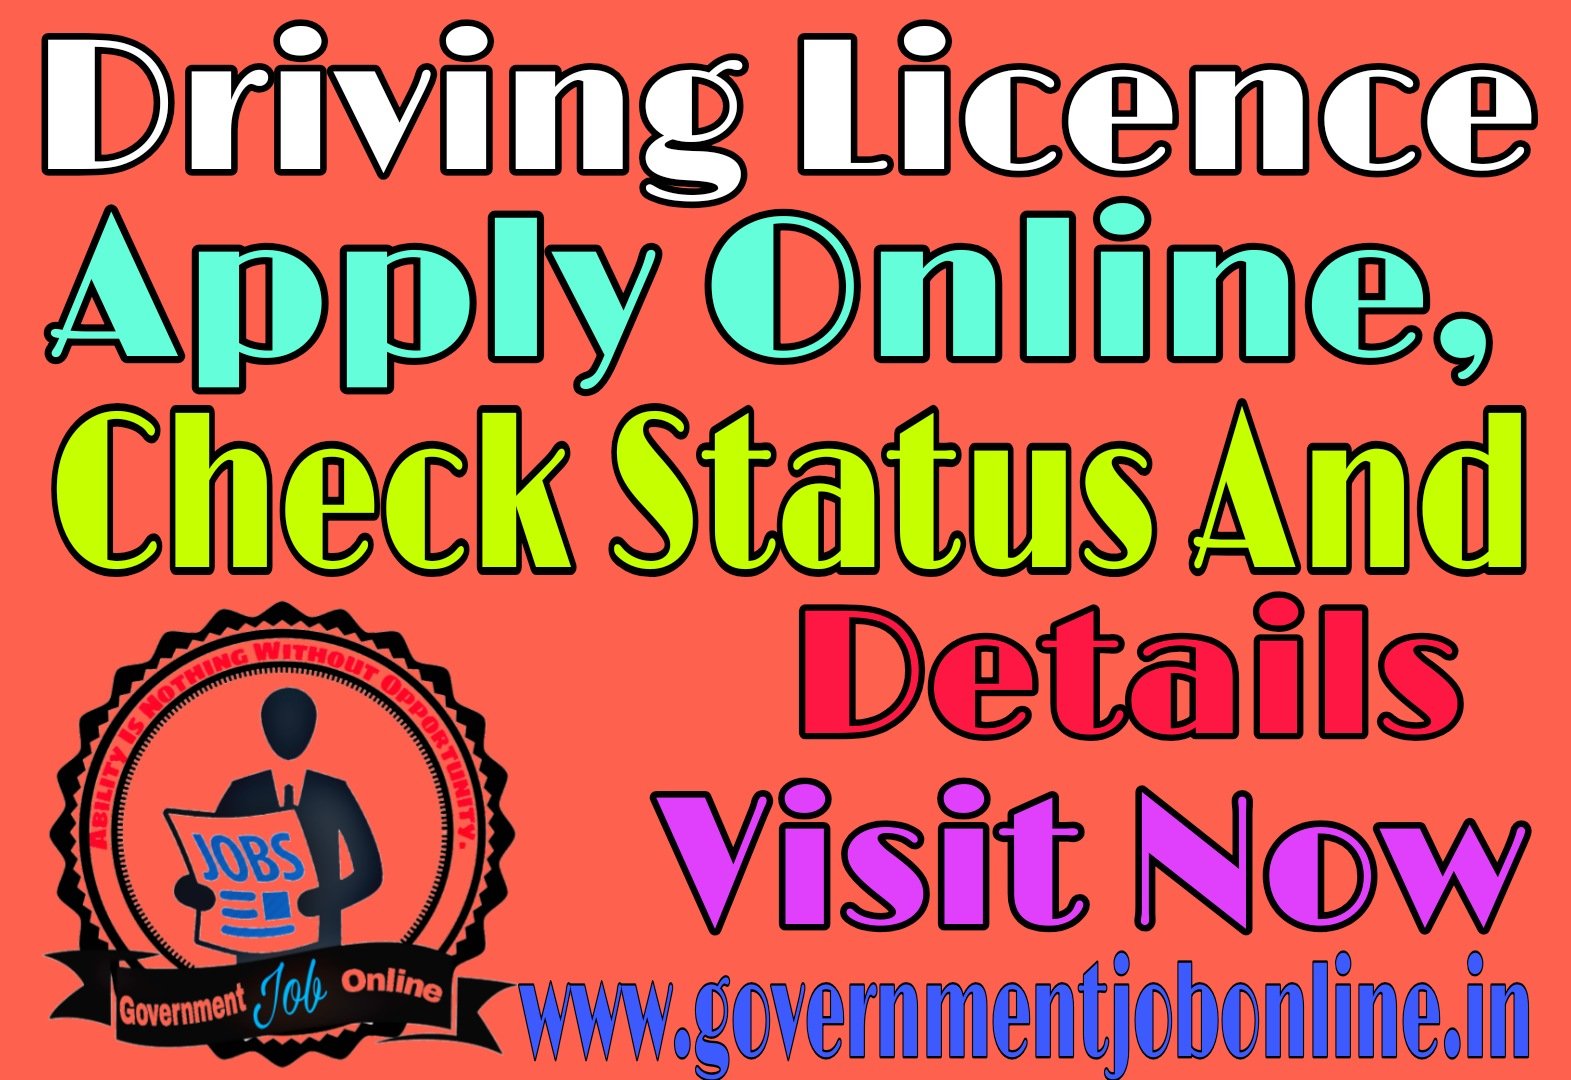 Driving Licence Apply Online, Check Status And Details